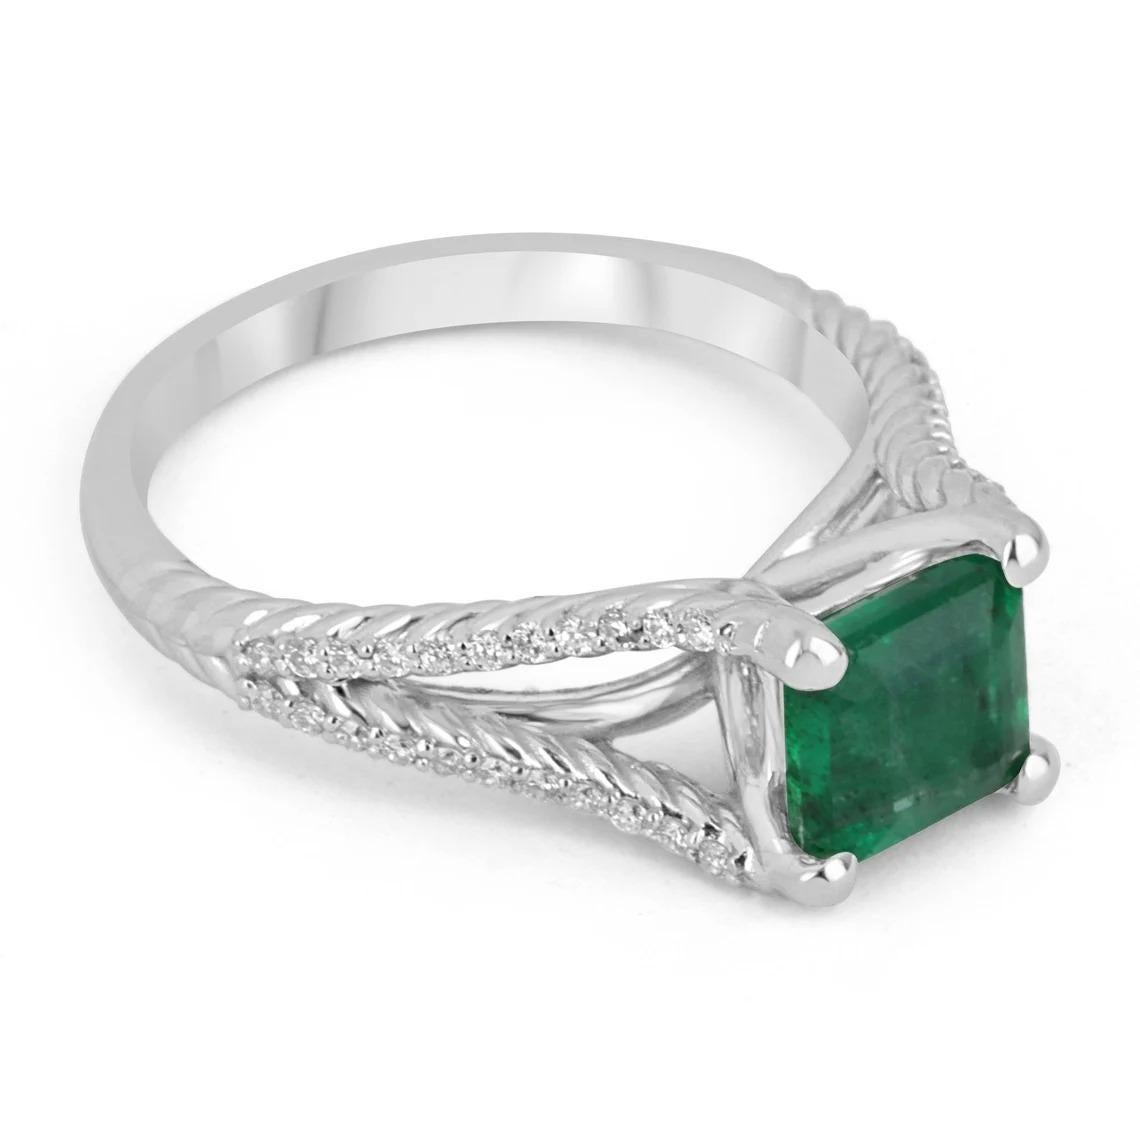 A dazzling emerald and diamond ring. This beautiful piece features a 1.41-carat, natural Zambian Asscher cut emerald. The gem displays a vivid dark green color, and very good clarity. Securely four prong-set, with a split shank that has multiple